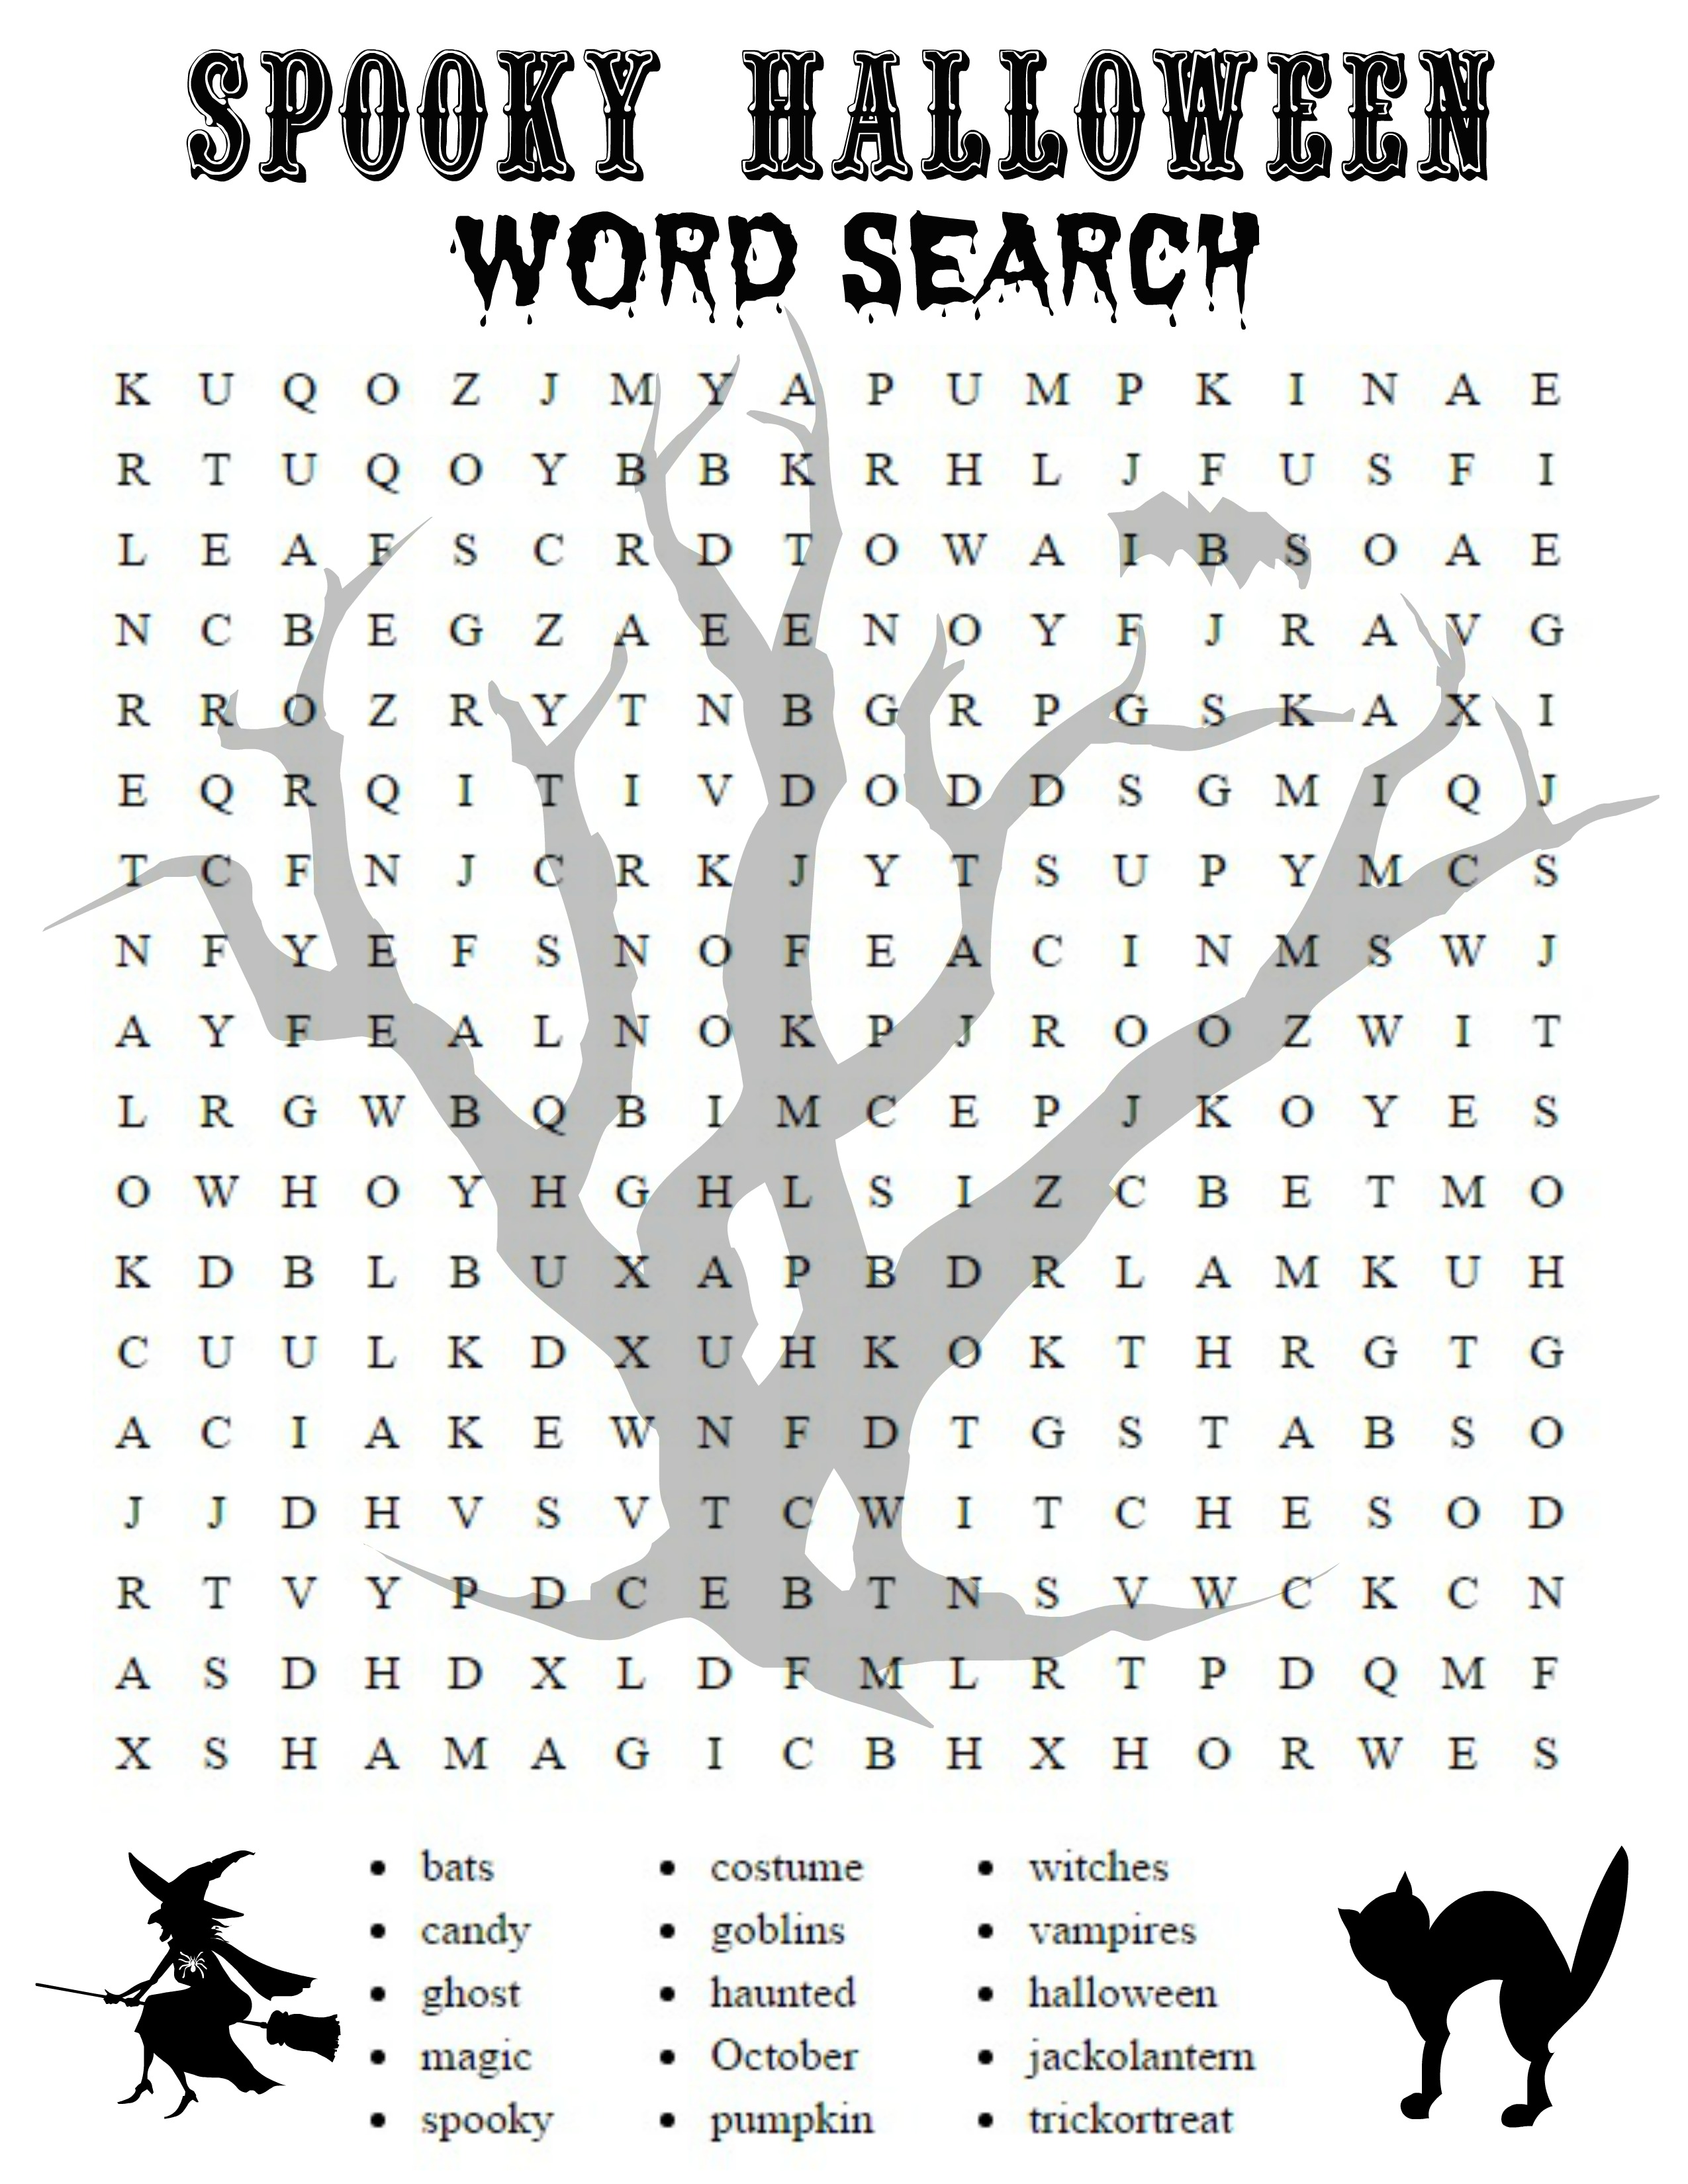 26 Spooky Halloween Word Searches KittyBabyLove